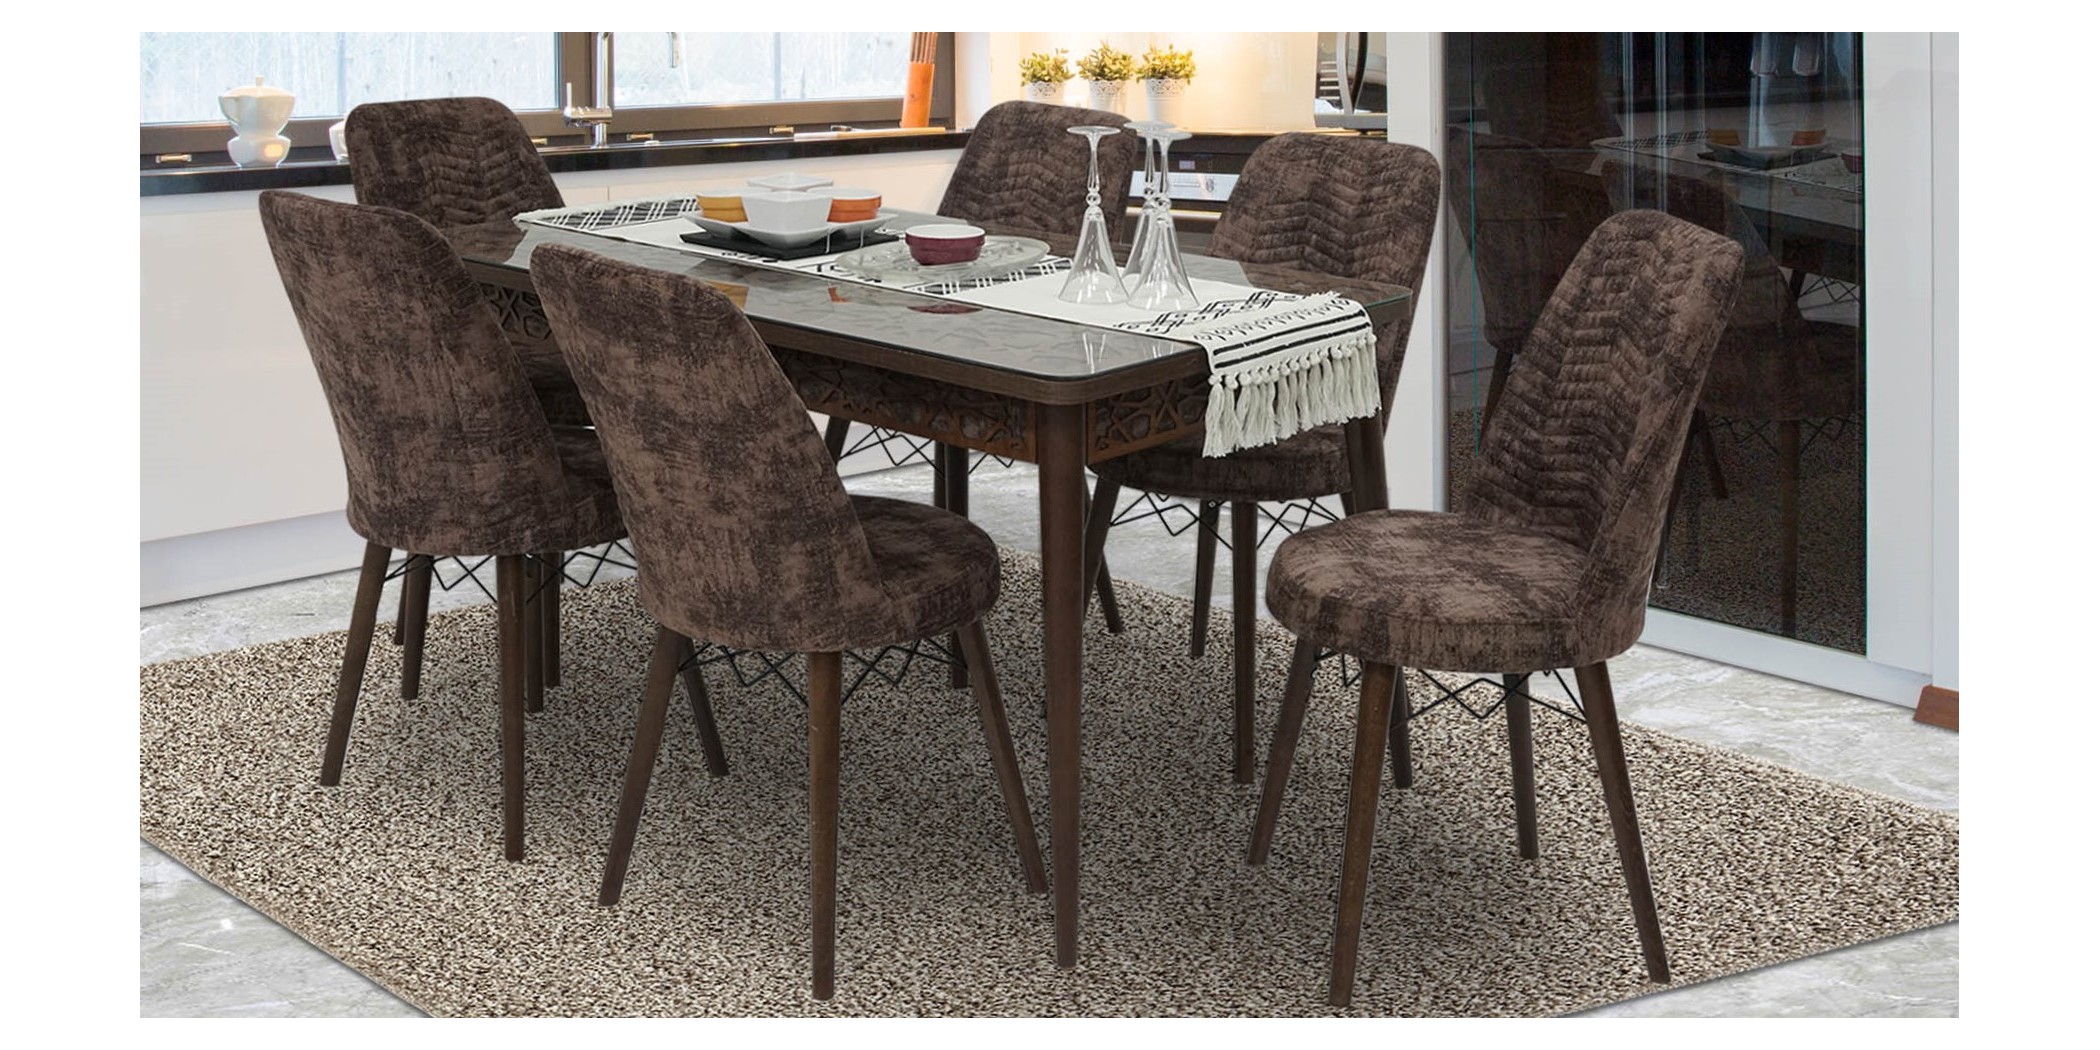 Ceren Table+6 chairs Brown Moirer